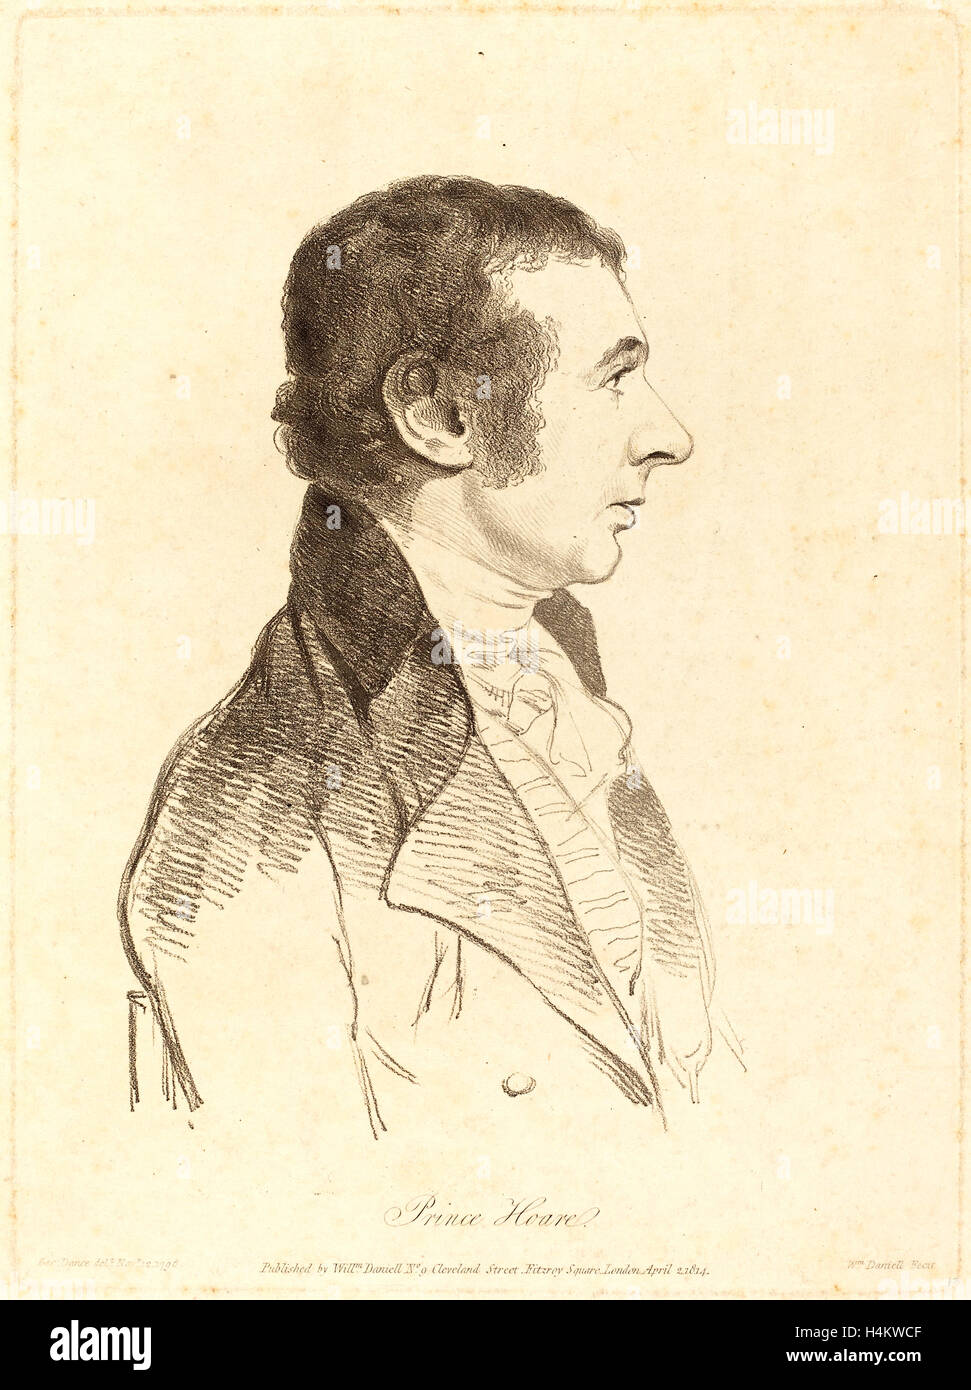 William Daniell après George Dance II (1769-1837), Prince (Hoare, lithographie, 1814 Banque D'Images